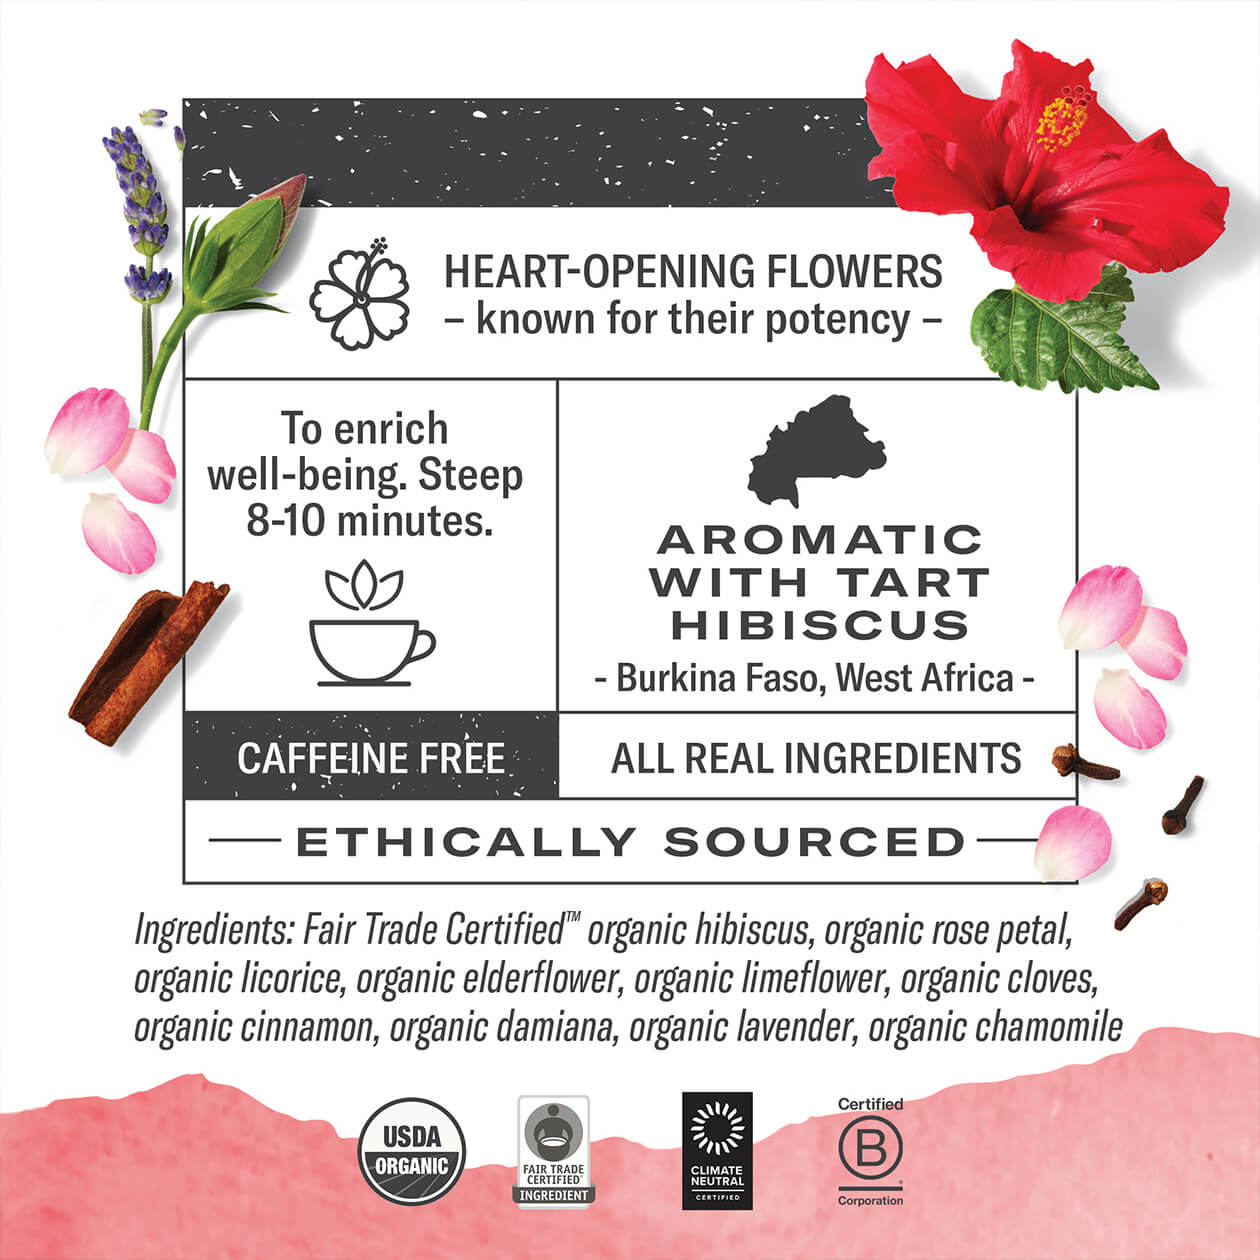 Infographic about Hibiscus: steep 8-10 minutes, origin: Burkina Faso West Africa, caffeine free, all real ingredients, ethically sourced